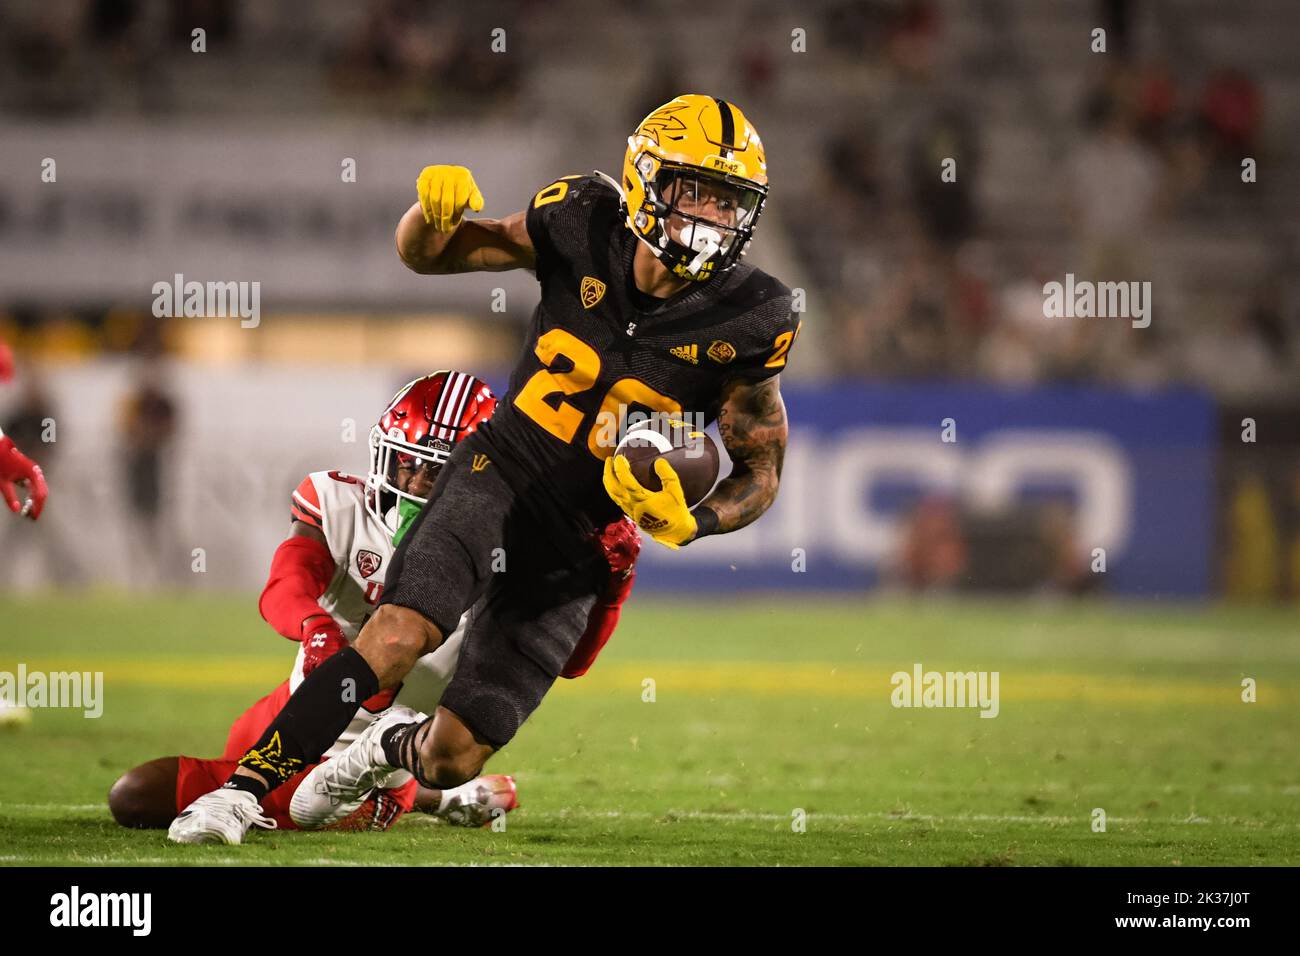 Arizona State wide receiver Giovanni Sanders (20) attempts to break free in the fourth quarter of an NCAA college football game against the Utah Utes Stock Photo